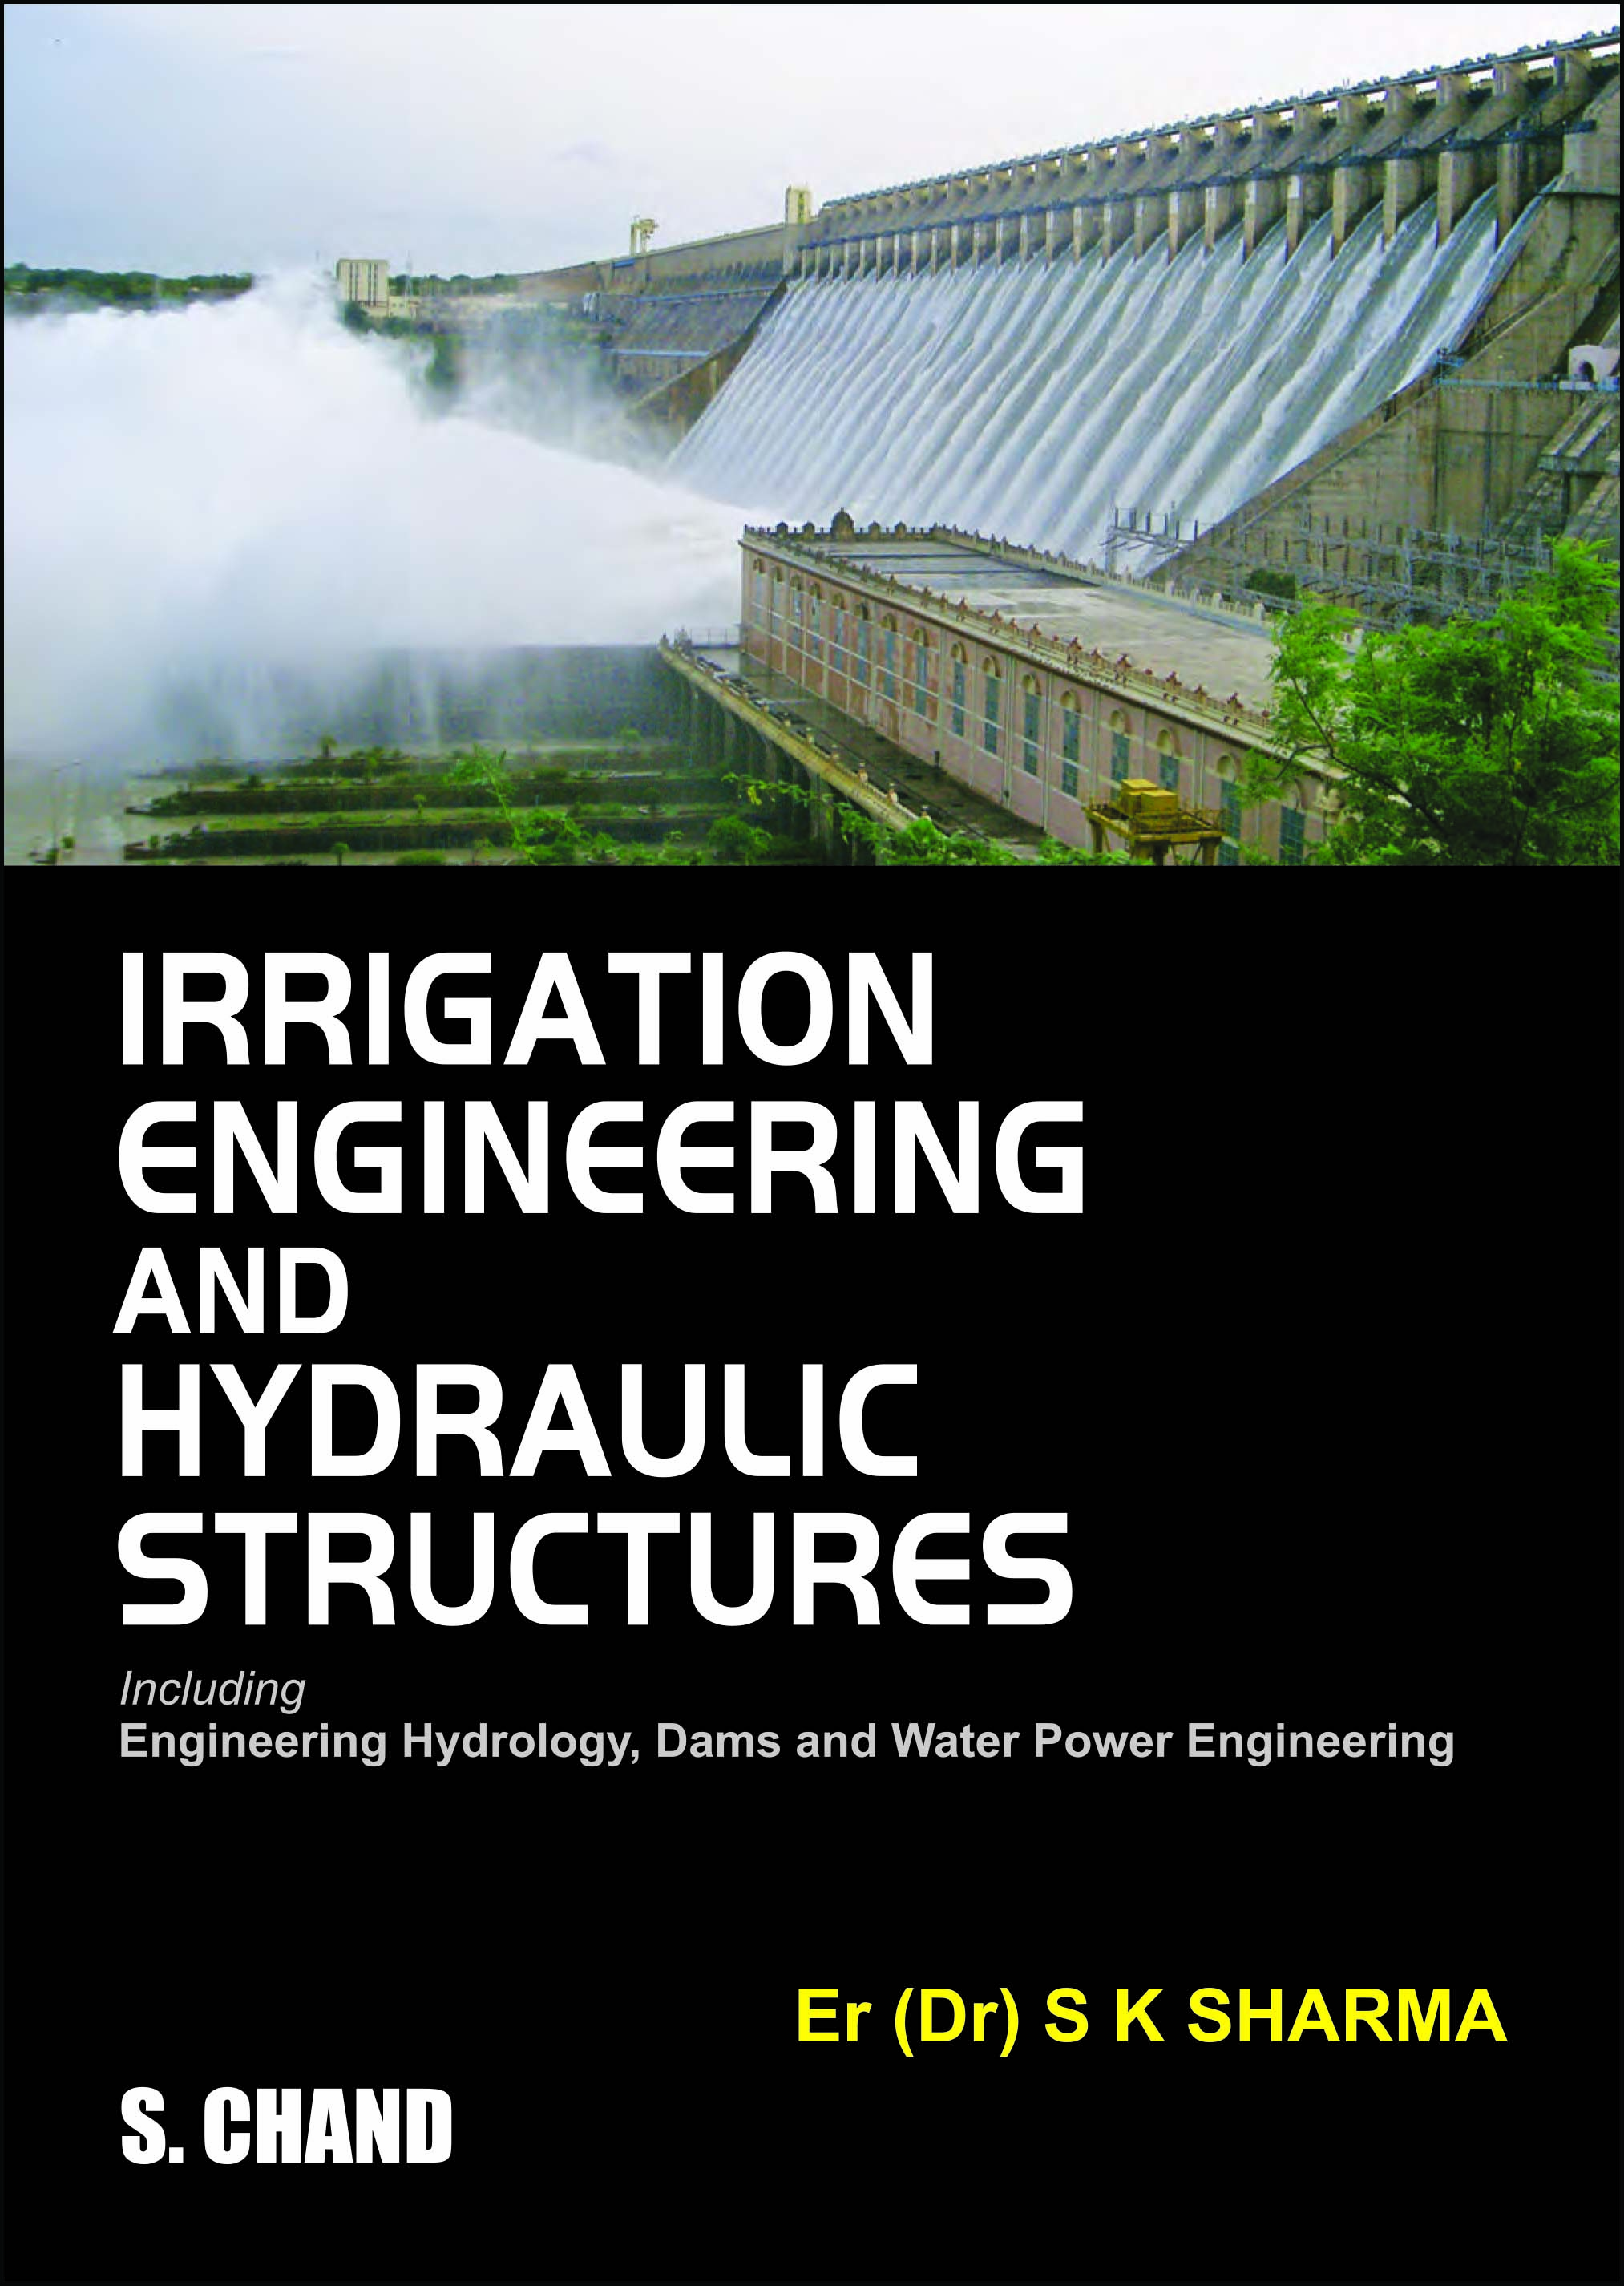 IRRIGATION ENGINEERING AND HYDRAULIC STRUCTURES